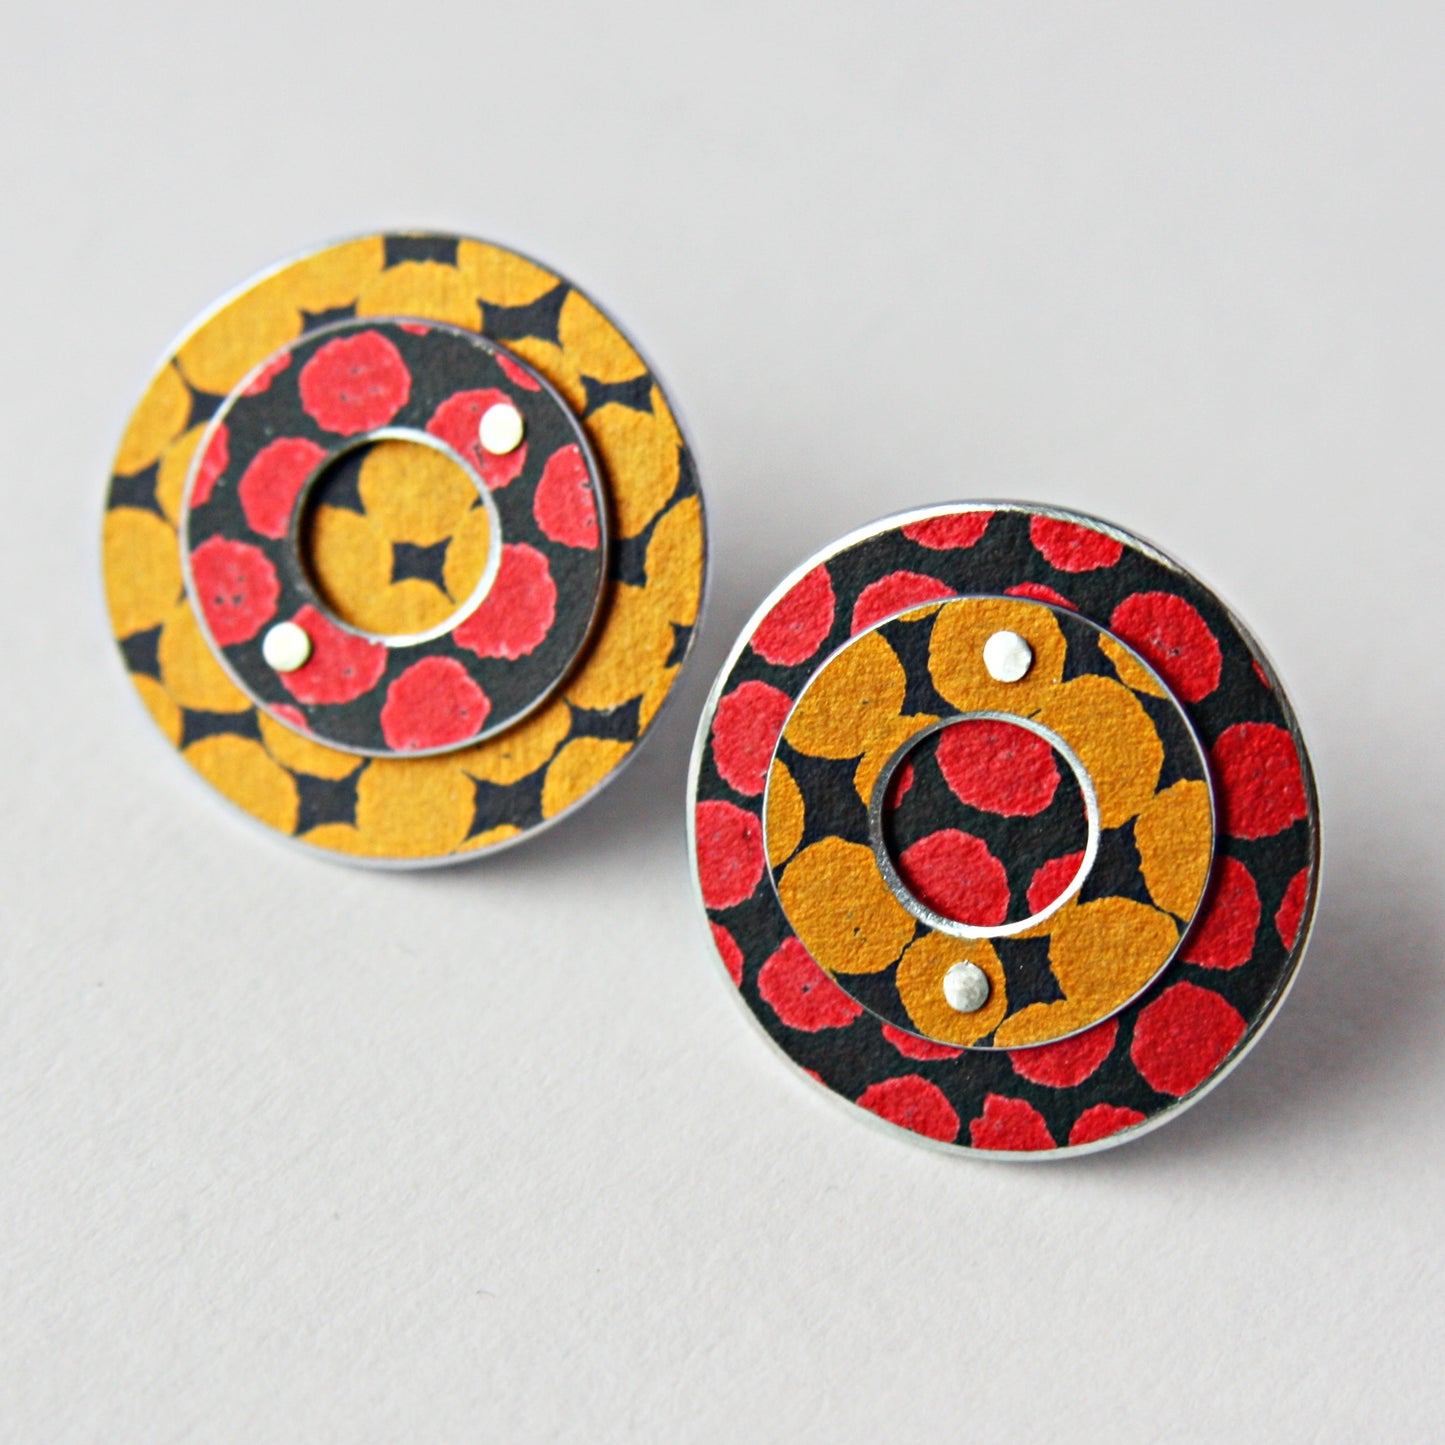 SL47 Orange and red spotty riveted disc stud earrings